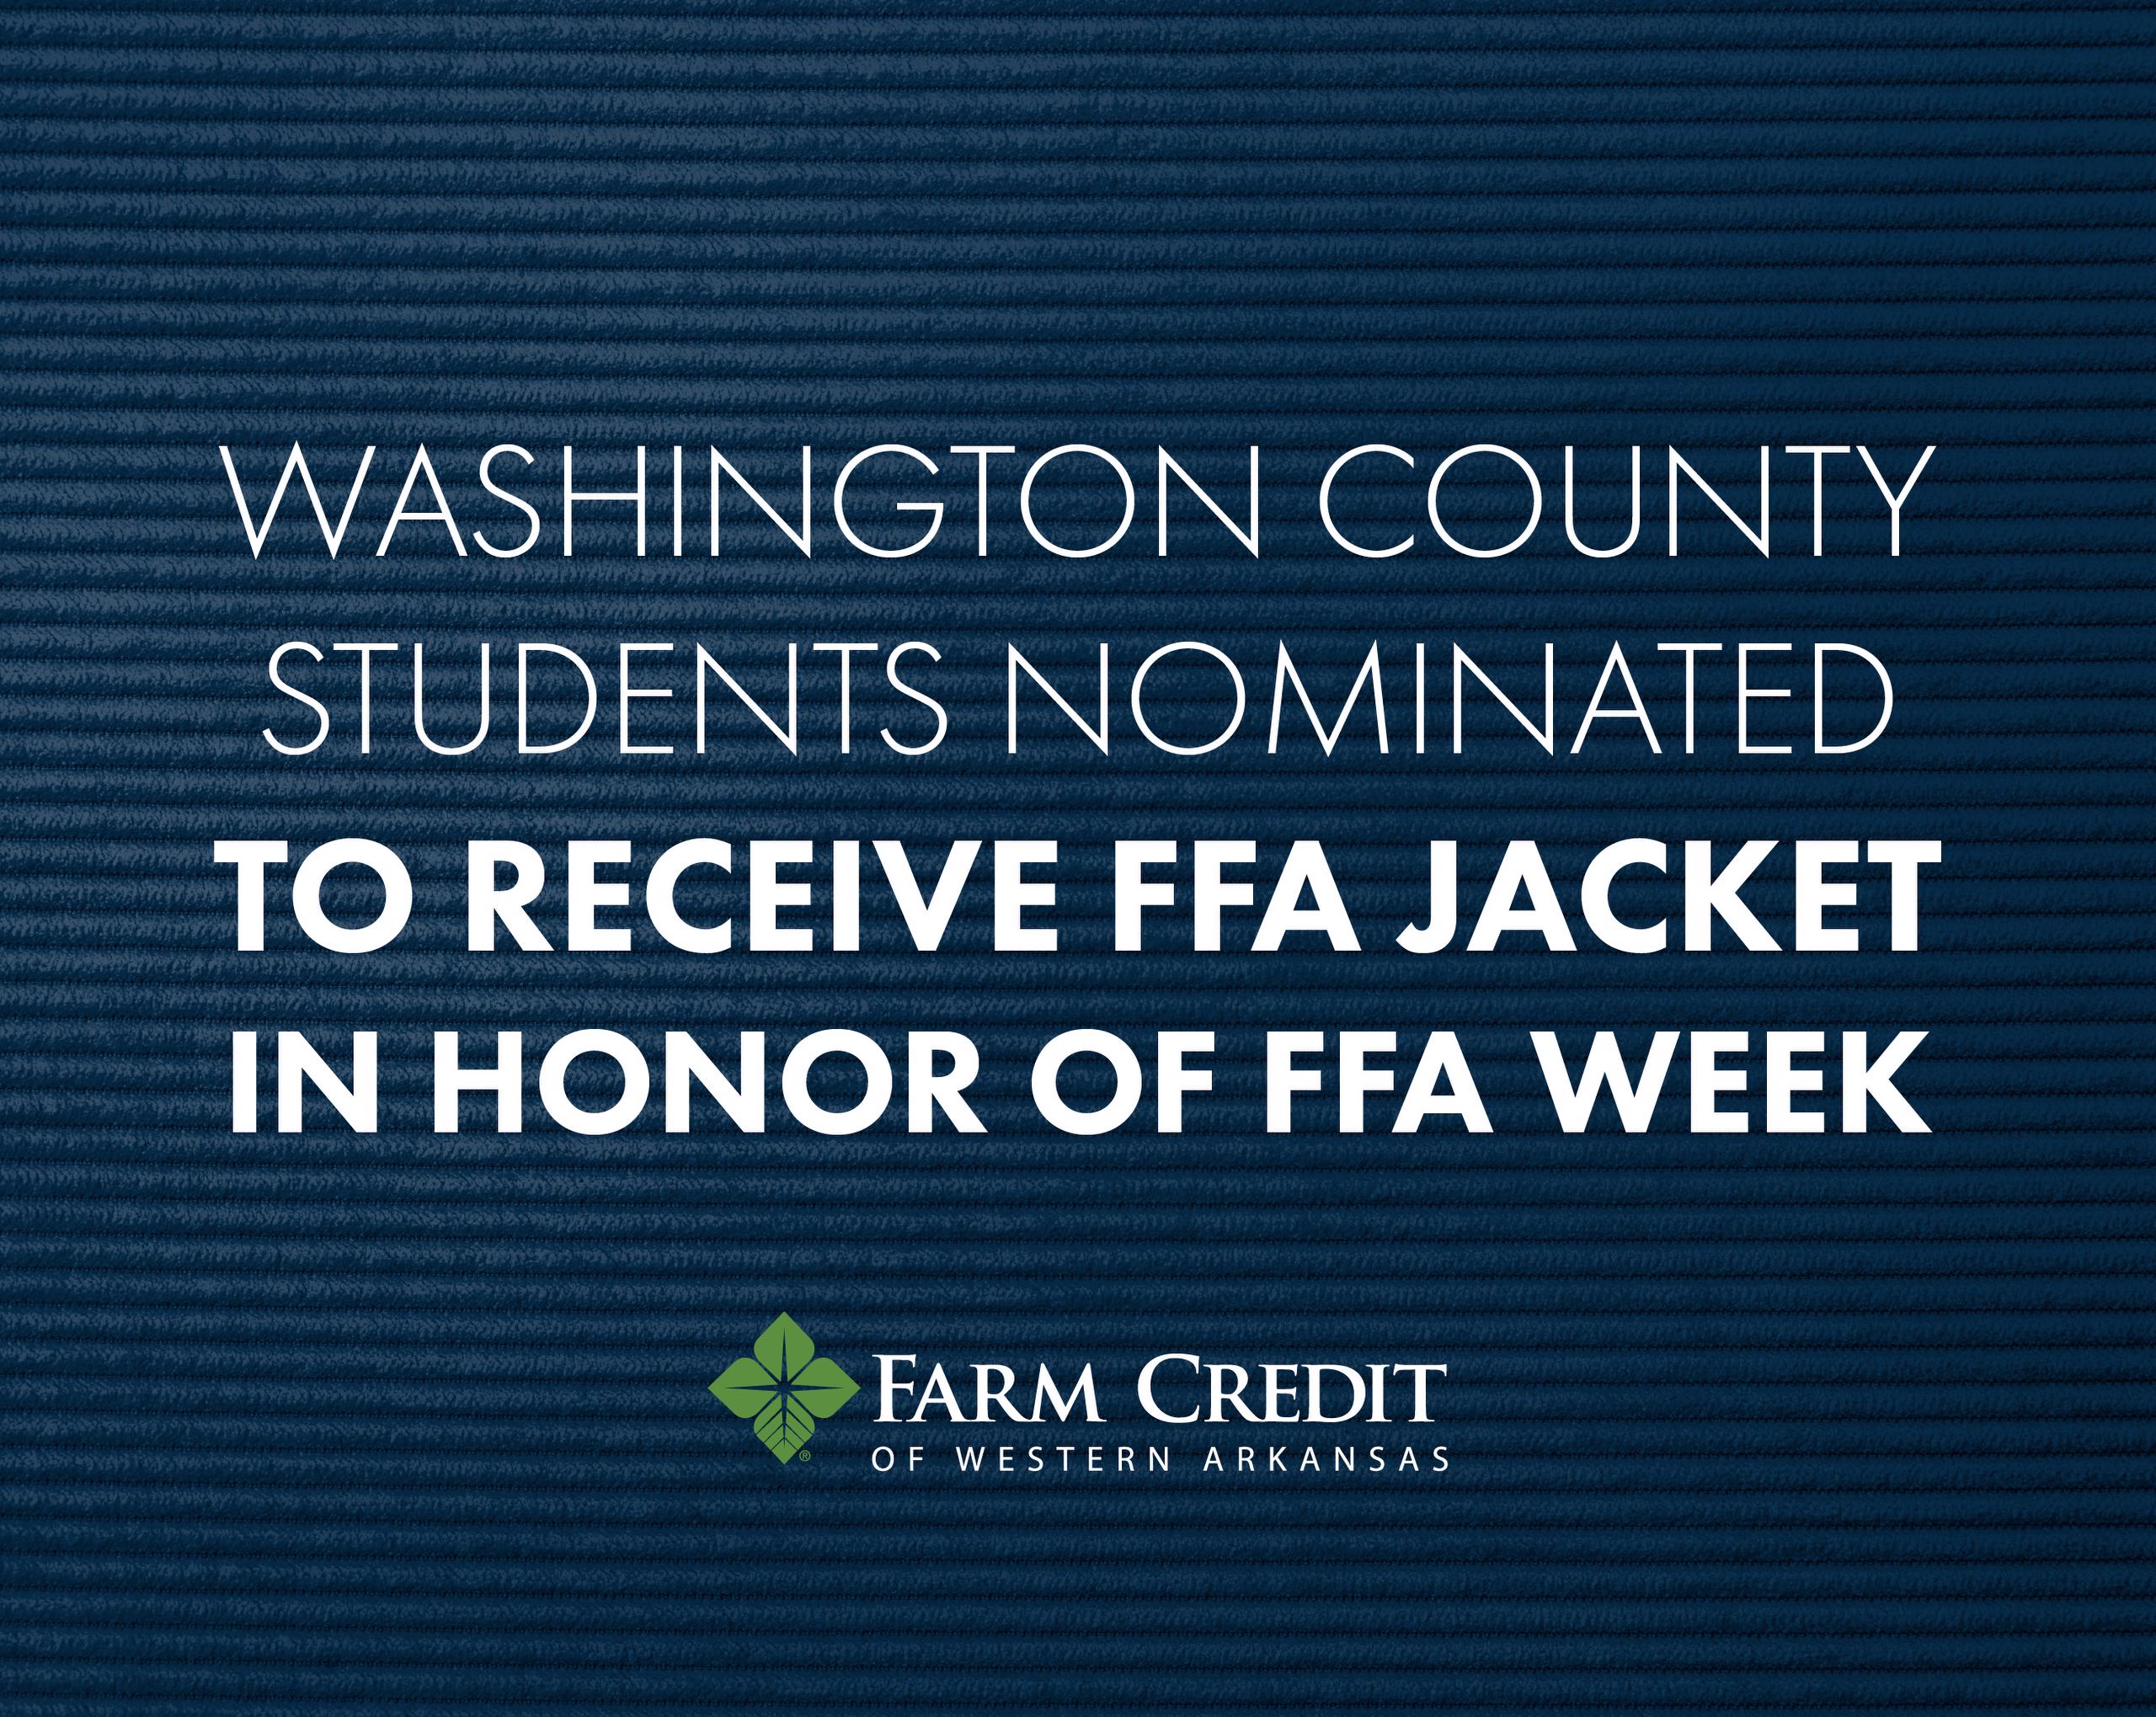 Blue corduroy background, text reads Washington county students nominated to receive FFA jacket in honor of FFA Week."